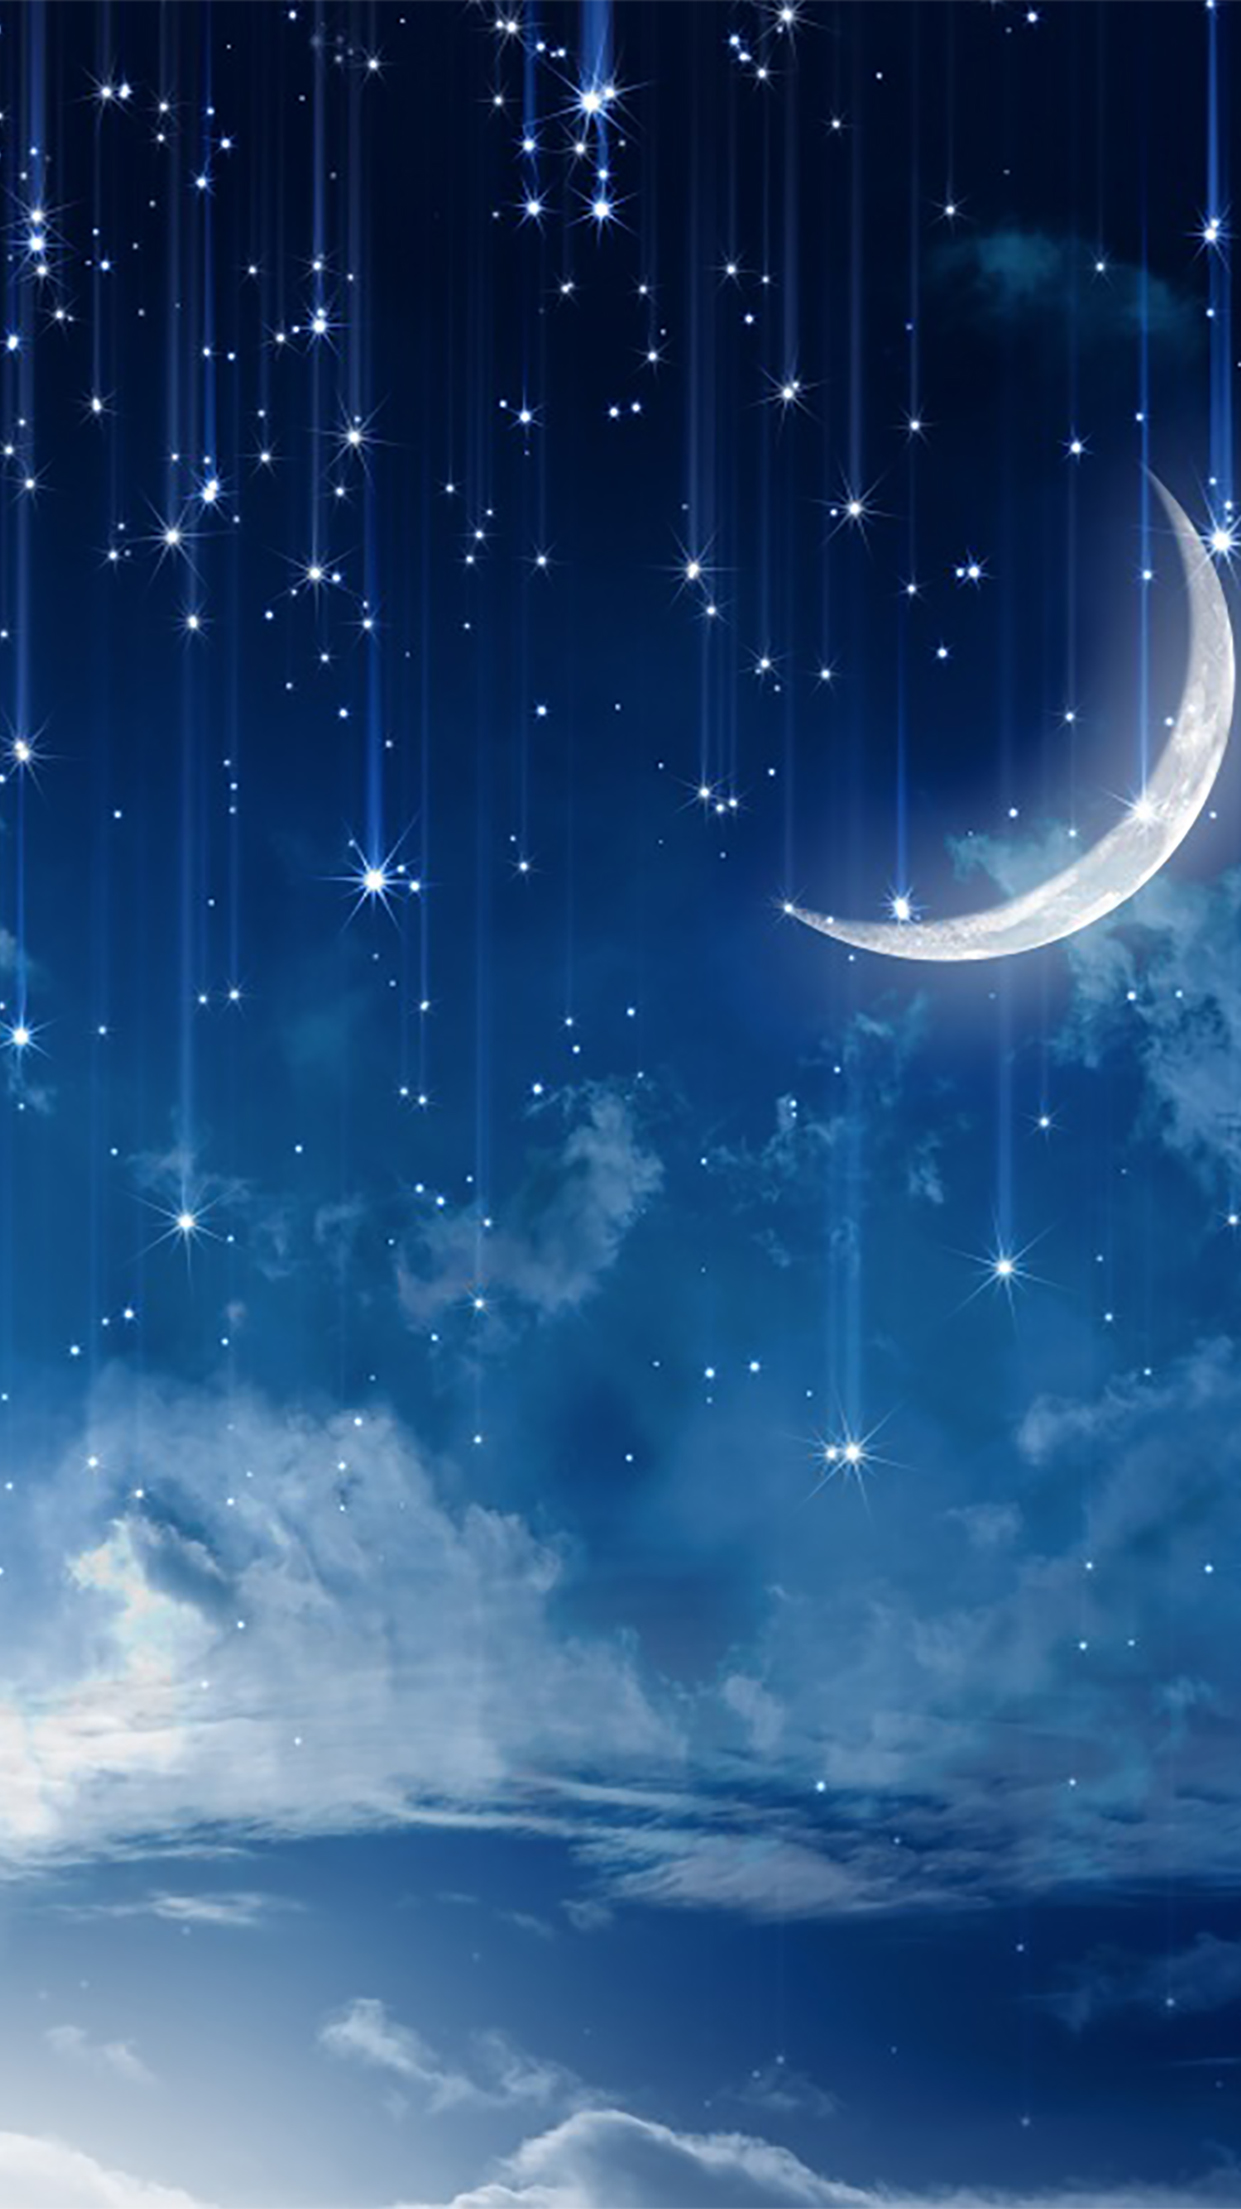 Sky, Sky with stars and moon Wallpaper for iPhone Pro Max, X, 6